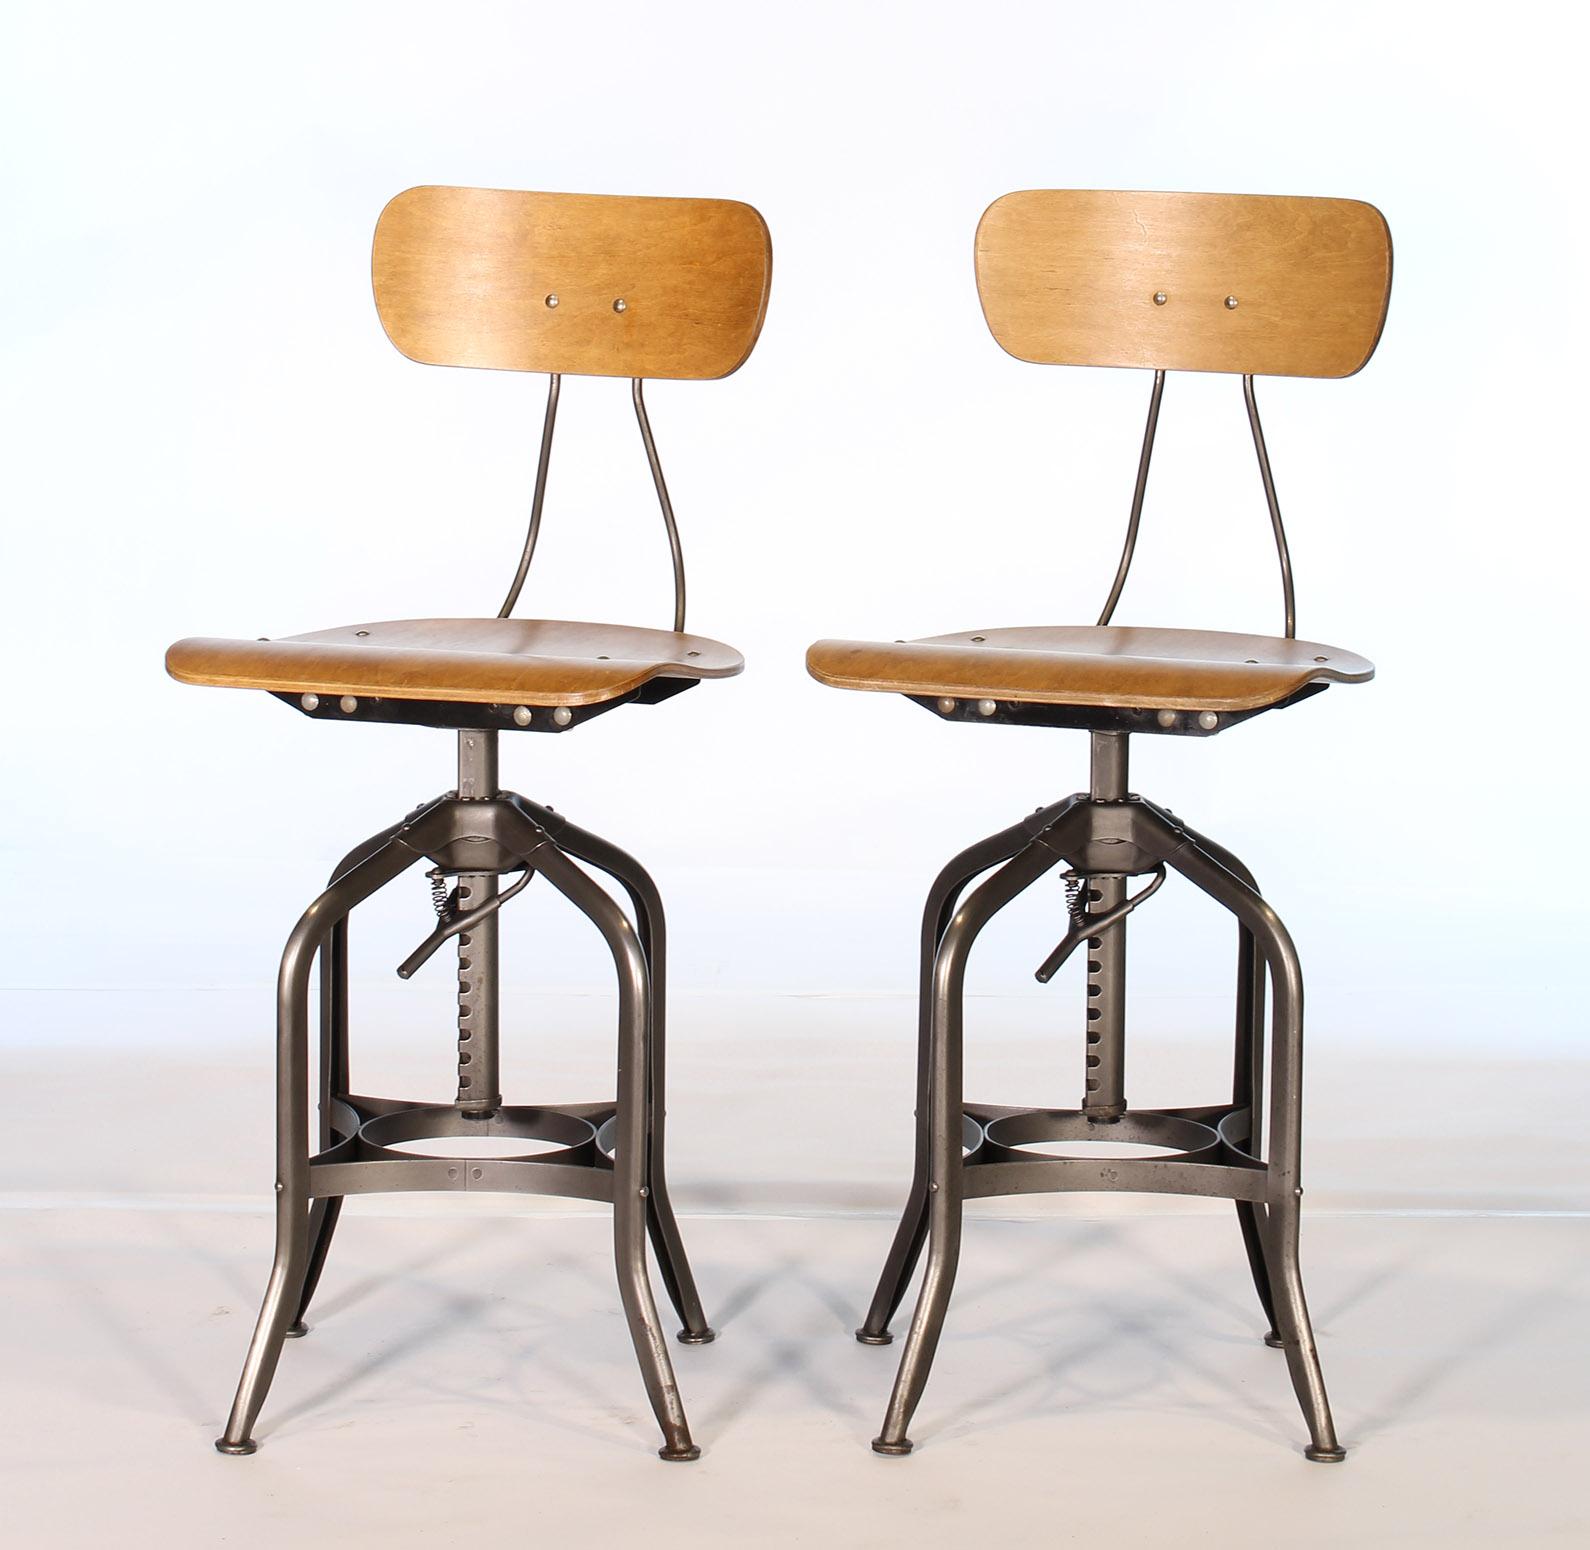 Pair of authentic vintage industrial bent plywood adjustable stools made by Toledo. Stools have been completely taken apart, cleaned, reassembled and checked throughout. A great choice for bar stools or kitchen counter seating. Seat height is